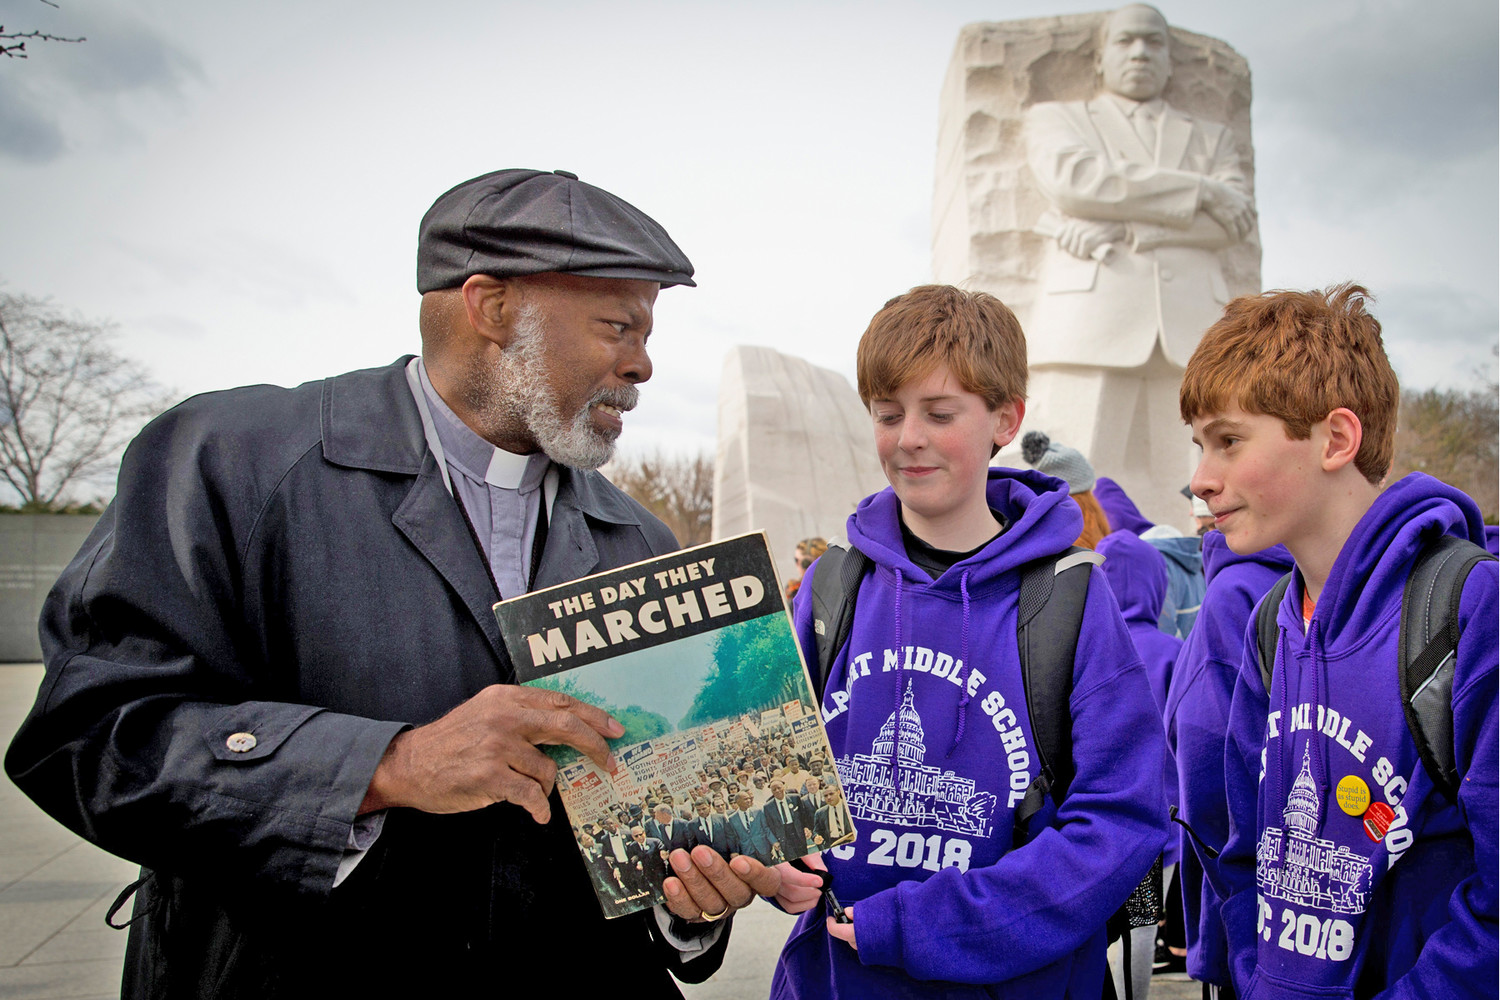 Deacon Timothy E. Tilghman of Our Lady of Perpetual Help Catholic Church in Washington shows two middle school students a program from the 1963 March on Washington for Jobs and Freedom, featuring the Rev. Martin Luther King Jr., while the deacon and youths visit the King memorial in Washington March 14. Deacon Tilghman was 15 when Rev. Dr. King was assassinated April 4, 1968. He accompanied his father as he traveled through Washington to help those who were impacted during the riots that ensued.